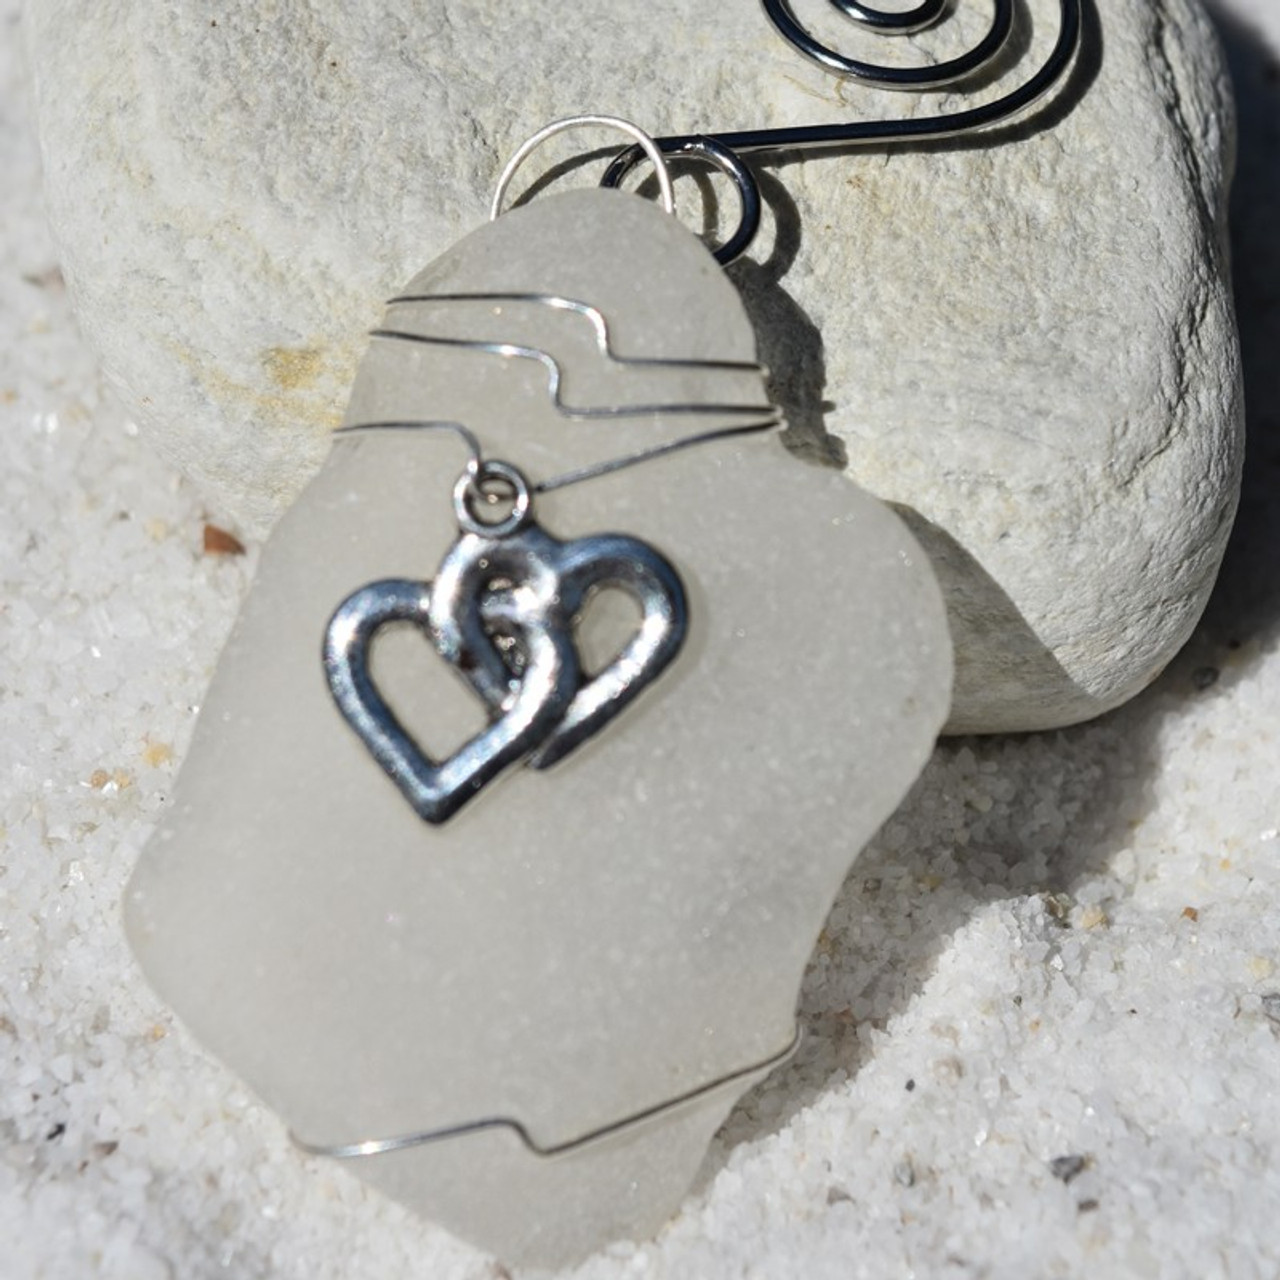 Double Hearts Charm on a Surf Tumbled Sea Glass Ornament - Choose Your Color Sea Glass Frosted, Green, and Brown - Made to Order